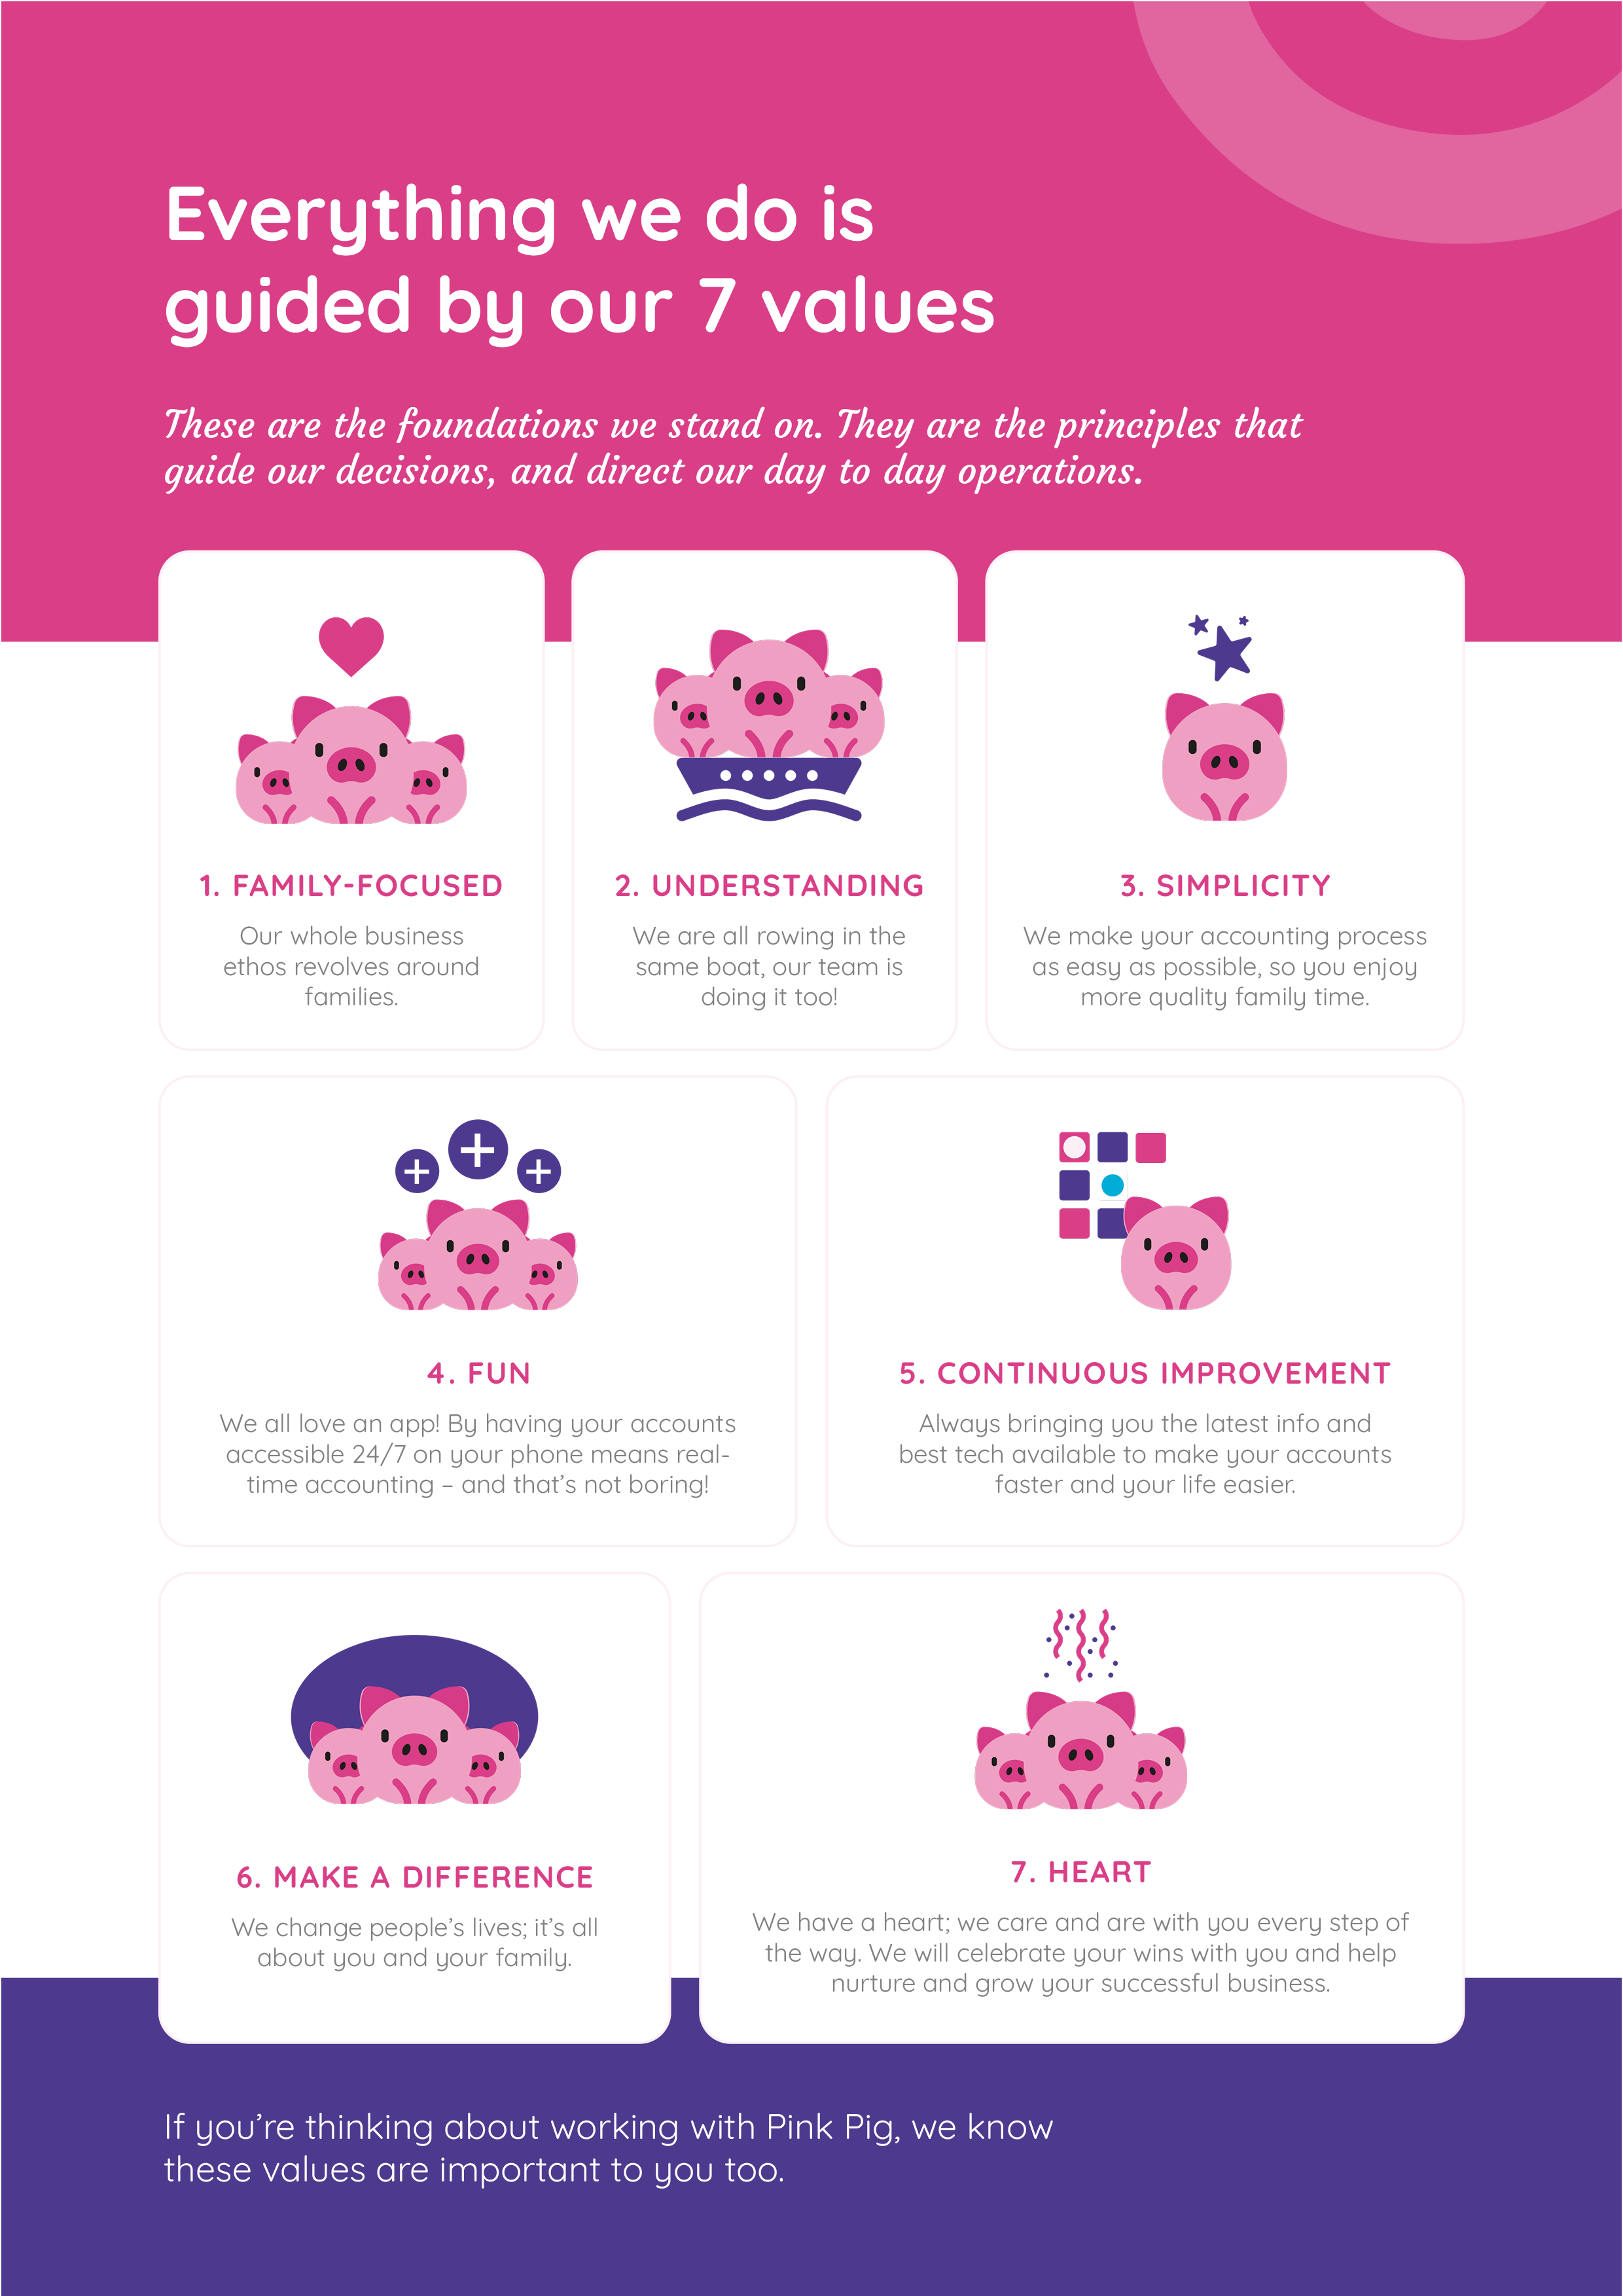 pink pig financials pig icons with descriptive values icons